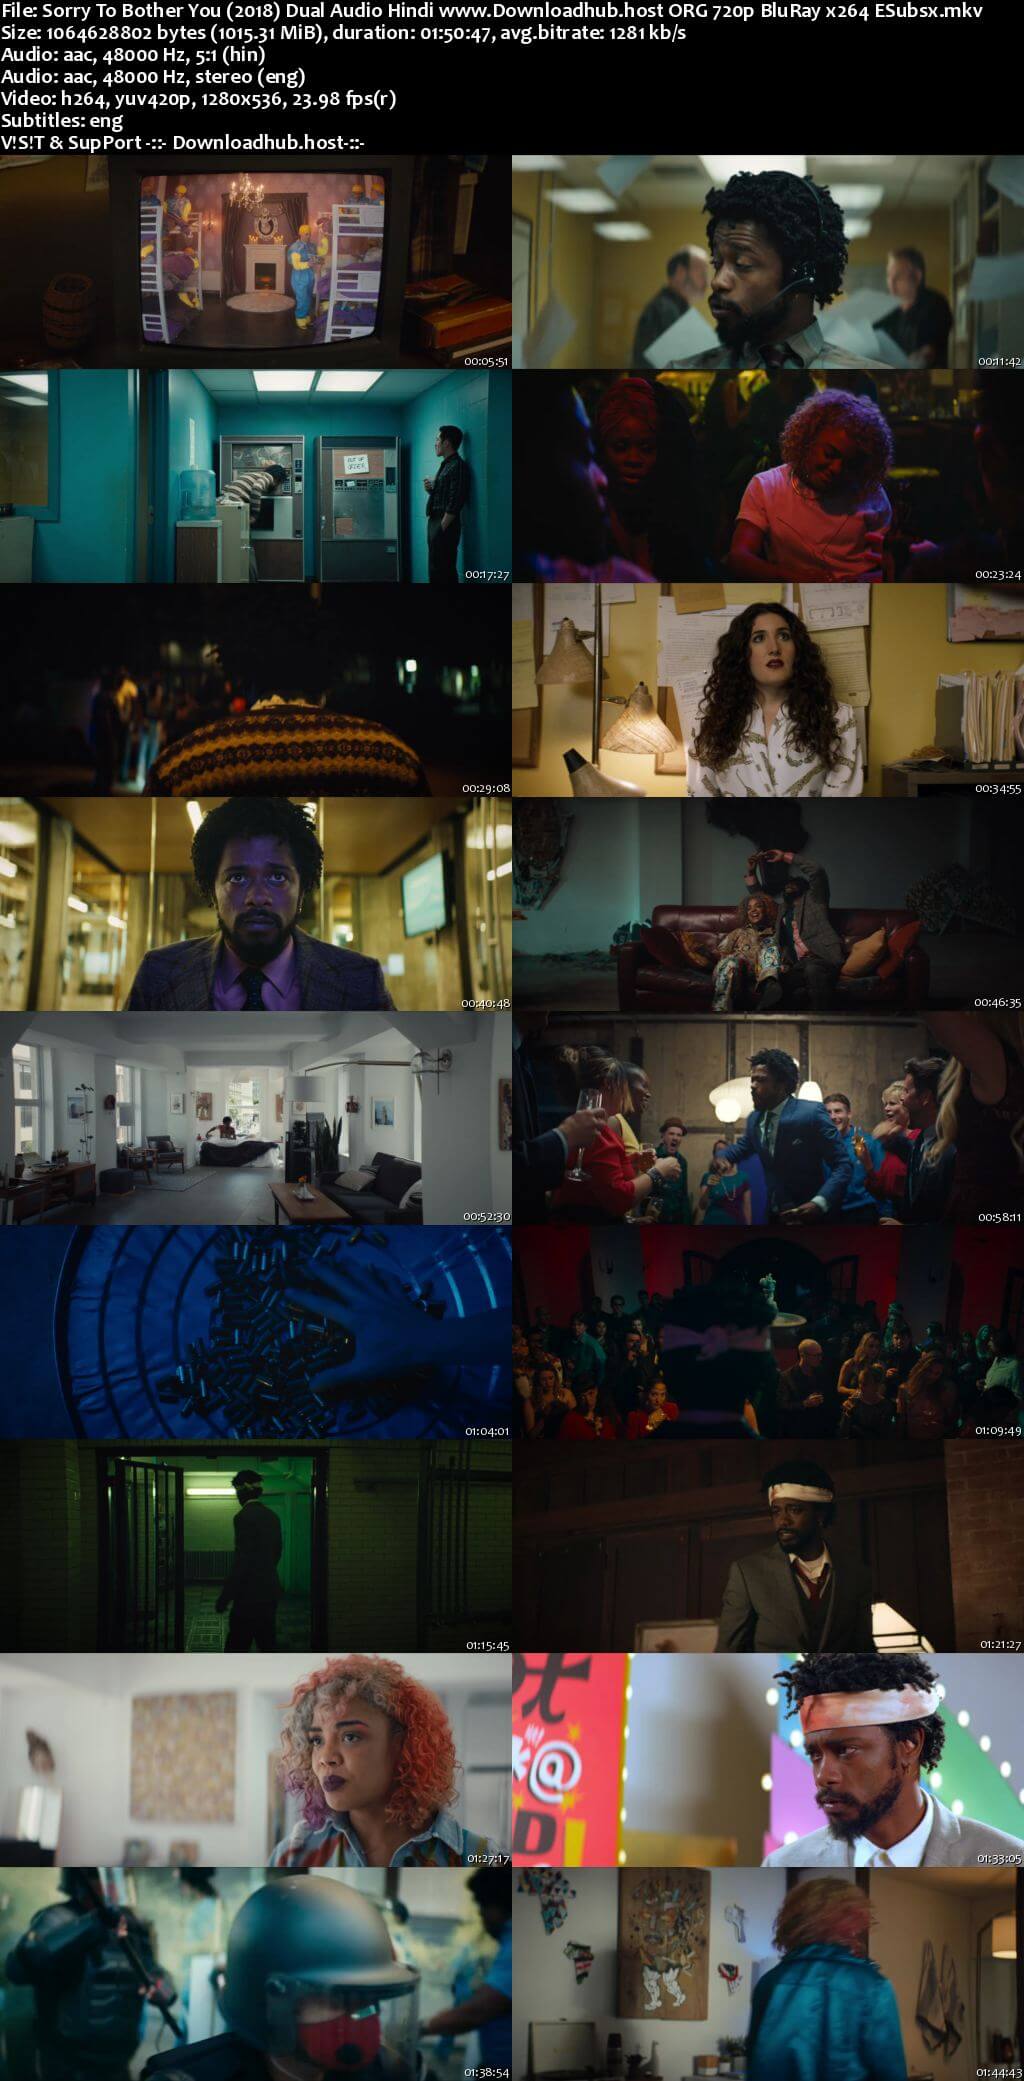 Sorry to Bother You 2018 Hindi Dual Audio 720p BluRay ESubs